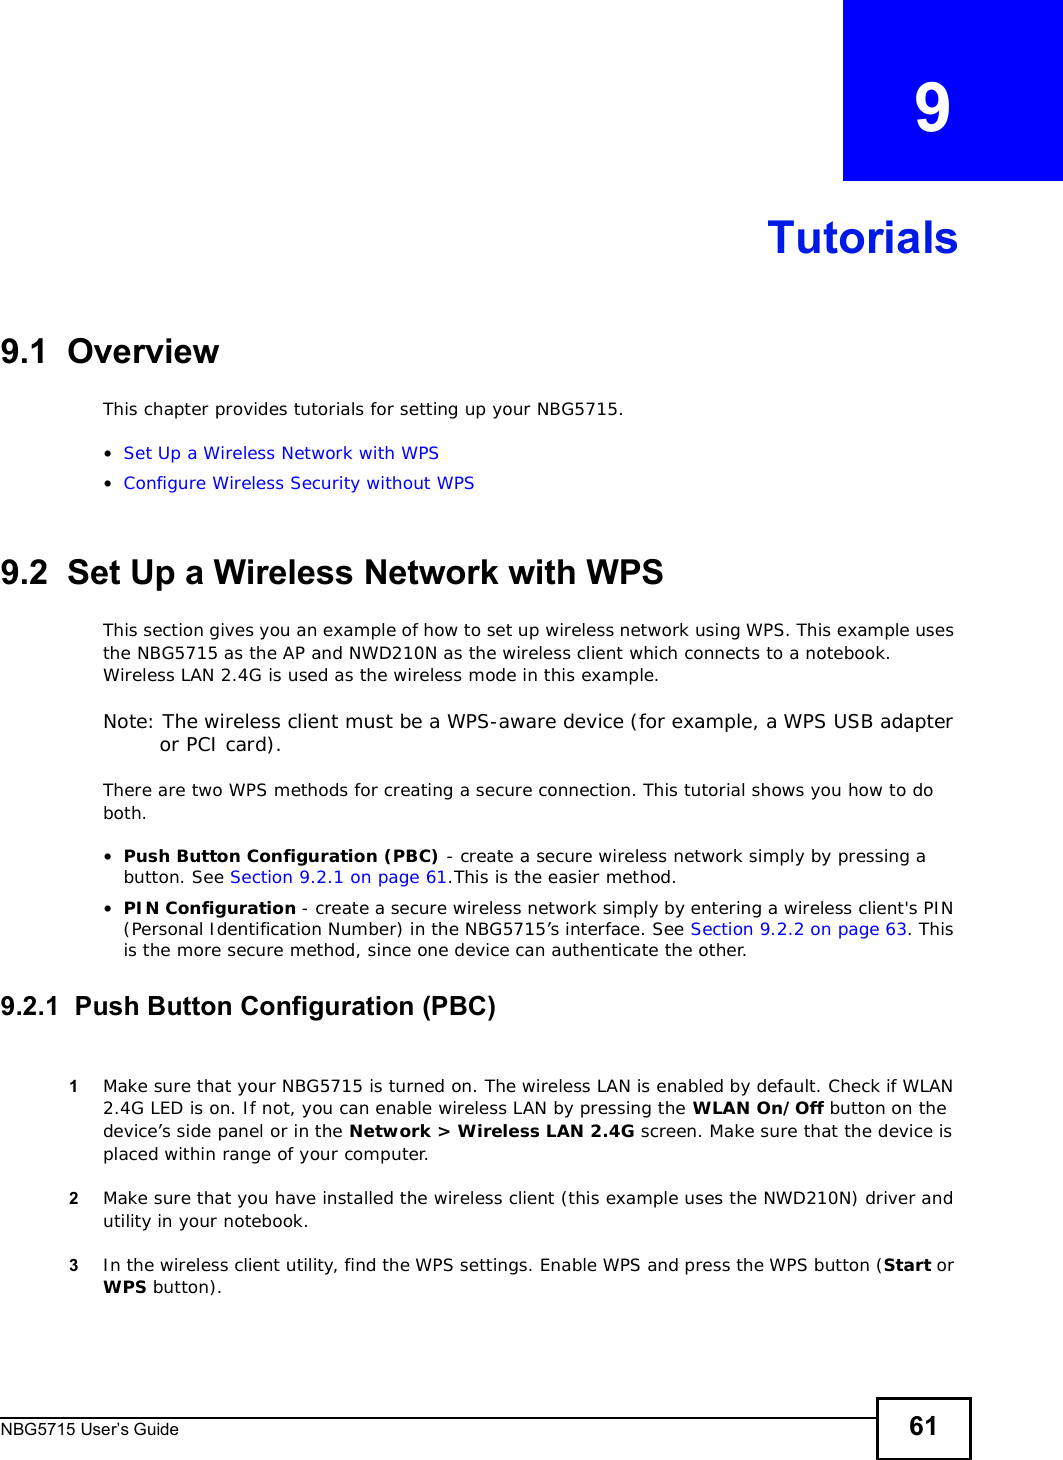 NBG5715 User’s Guide 61CHAPTER   9Tutorials9.1  OverviewThis chapter provides tutorials for setting up your NBG5715.•Set Up a Wireless Network with WPS•Configure Wireless Security without WPS9.2  Set Up a Wireless Network with WPSThis section gives you an example of how to set up wireless network using WPS. This example uses the NBG5715 as the AP and NWD210N as the wireless client which connects to a notebook. Wireless LAN 2.4G is used as the wireless mode in this example.Note: The wireless client must be a WPS-aware device (for example, a WPS USB adapter or PCI card).There are two WPS methods for creating a secure connection. This tutorial shows you how to do both.•Push Button Configuration (PBC) - create a secure wireless network simply by pressing a button. See Section 9.2.1 on page 61.This is the easier method.•PIN Configuration - create a secure wireless network simply by entering a wireless client&apos;s PIN (Personal Identification Number) in the NBG5715’s interface. See Section 9.2.2 on page 63. This is the more secure method, since one device can authenticate the other.9.2.1  Push Button Configuration (PBC)1Make sure that your NBG5715 is turned on. The wireless LAN is enabled by default. Check if WLAN 2.4G LED is on. If not, you can enable wireless LAN by pressing the WLAN On/Off button on the device’s side panel or in the Network &gt; Wireless LAN 2.4G screen. Make sure that the device is placed within range of your computer. 2Make sure that you have installed the wireless client (this example uses the NWD210N) driver and utility in your notebook.3In the wireless client utility, find the WPS settings. Enable WPS and press the WPS button (Start or WPS button).